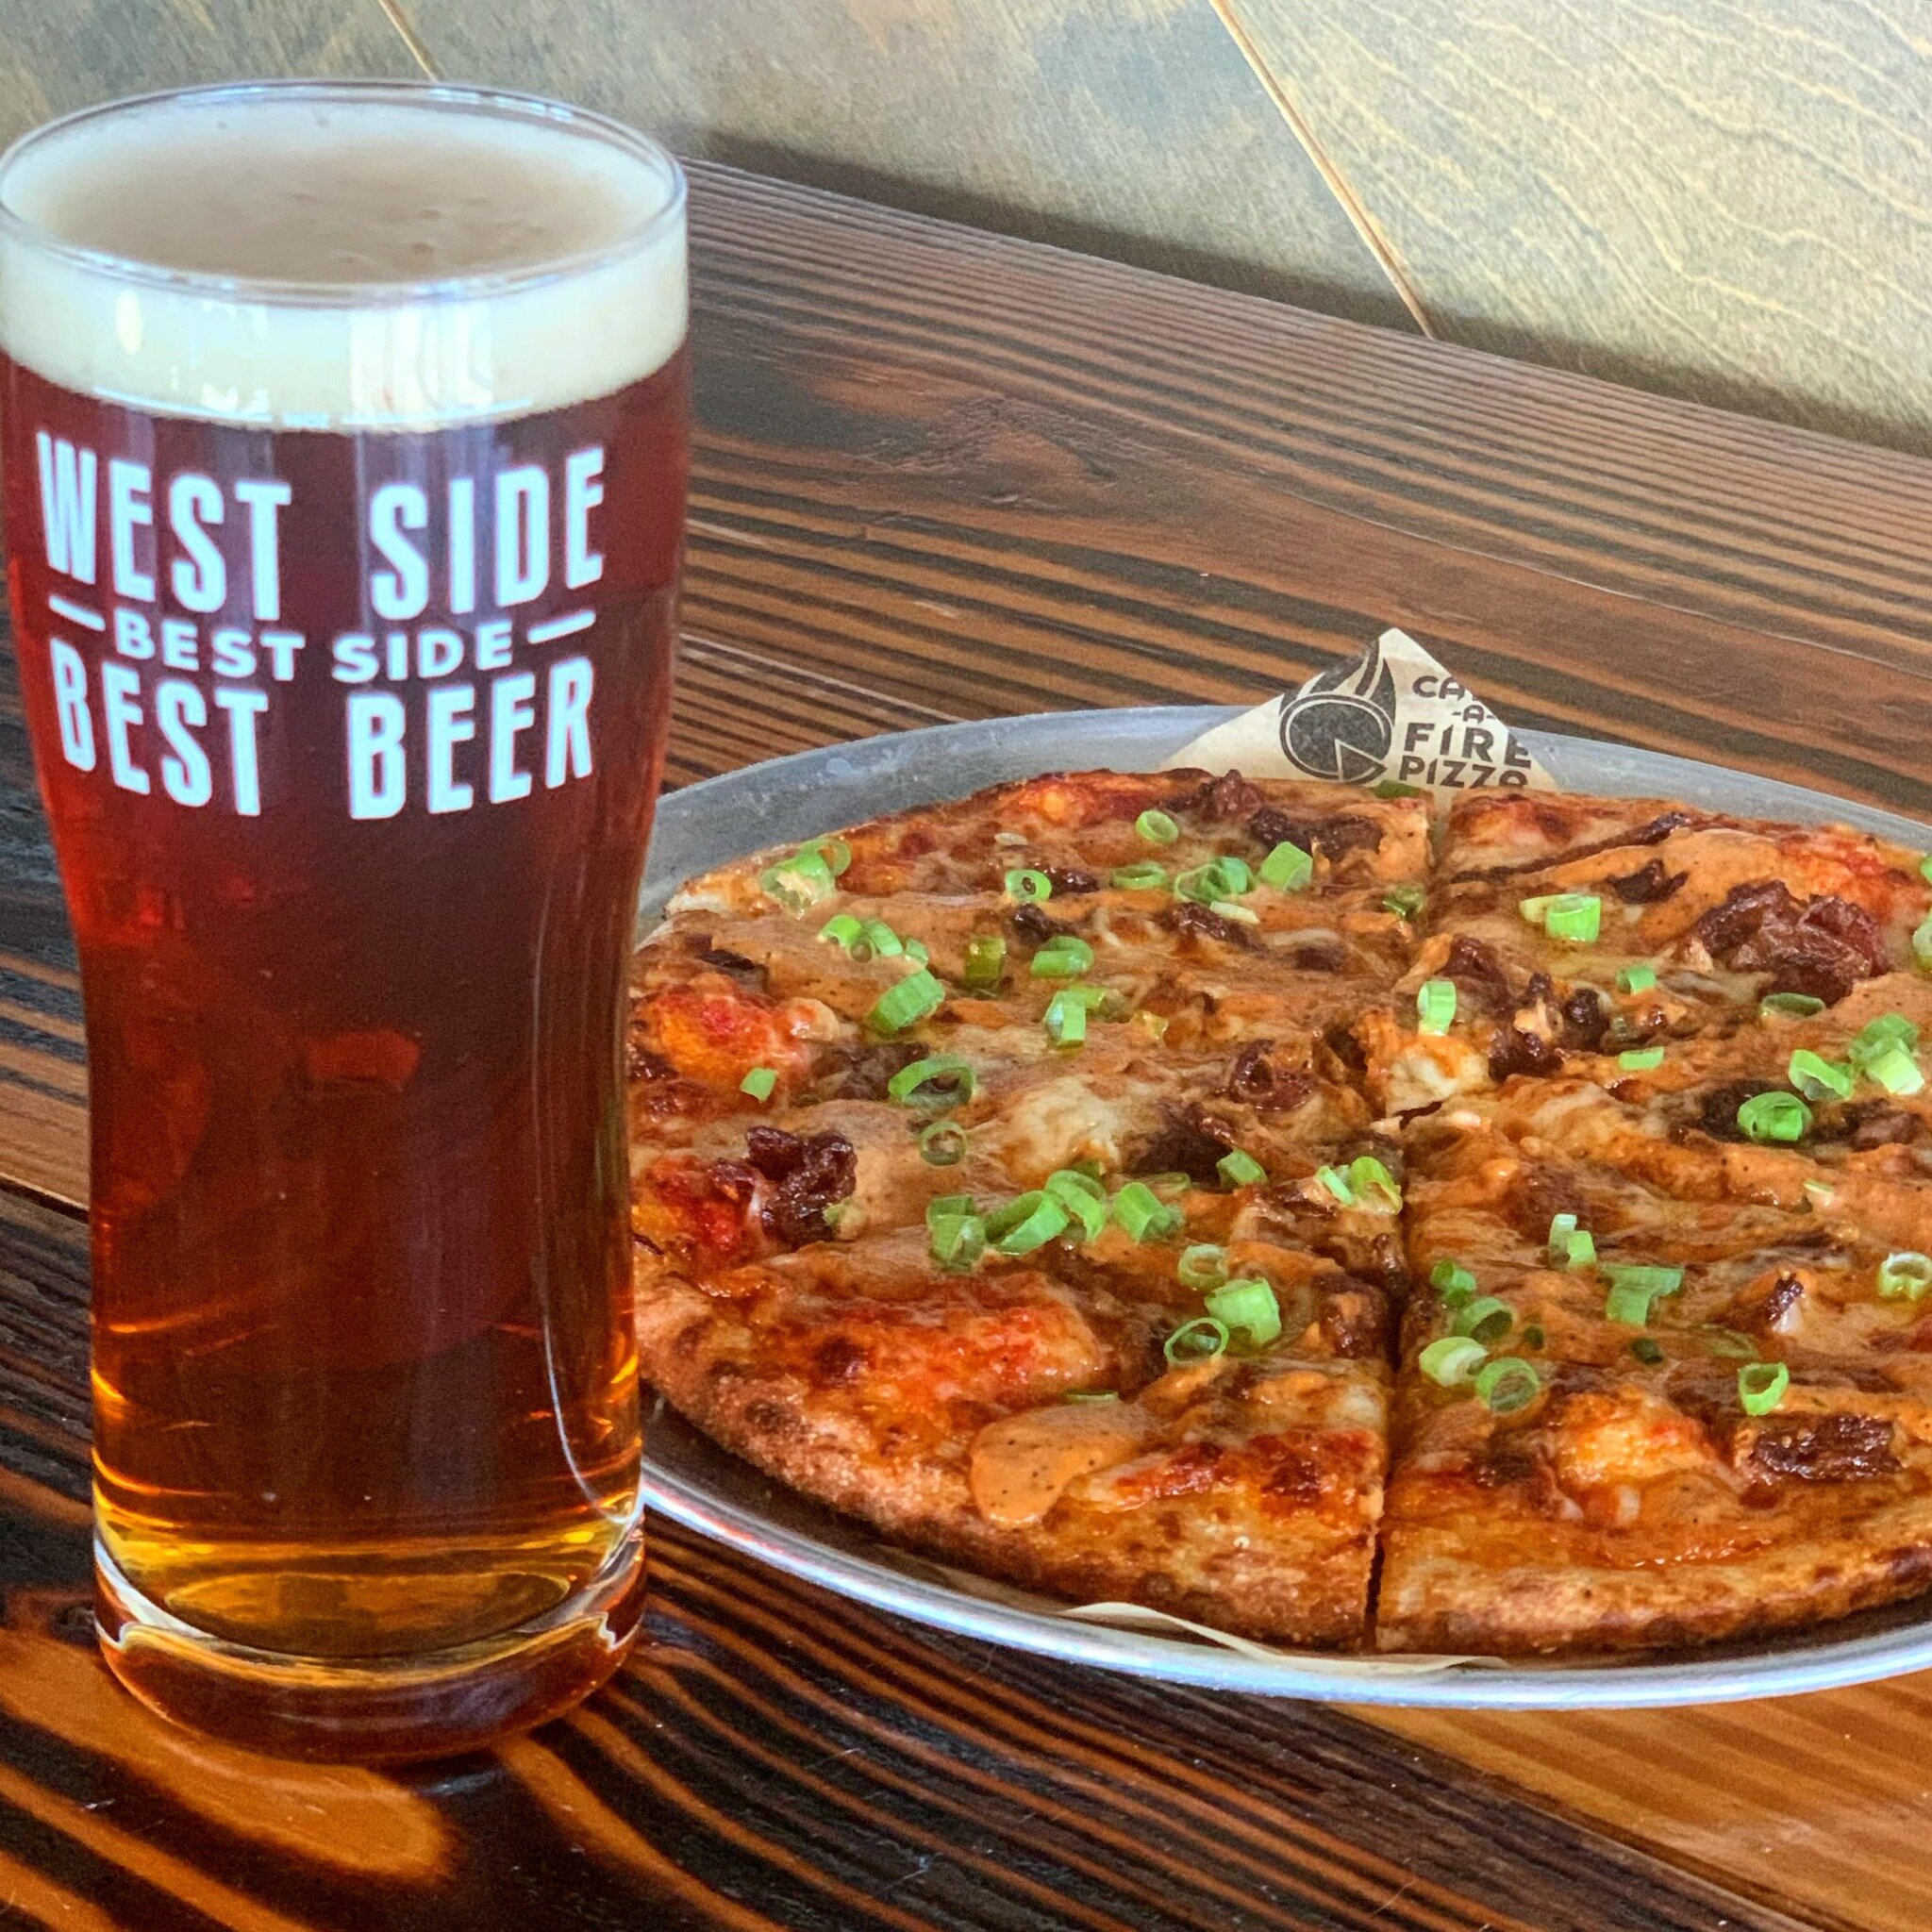 Grand Opening of our NEWEST LOCATION inside @westsidebrewing is this Friday starting at noon! Be one of the first 50 guests to arrive at get entered to win ONE FREE PIZZA EVERY WEEK FOR A YEAR!! #grandopening #freepizzaforayear #westsidebestside #wes